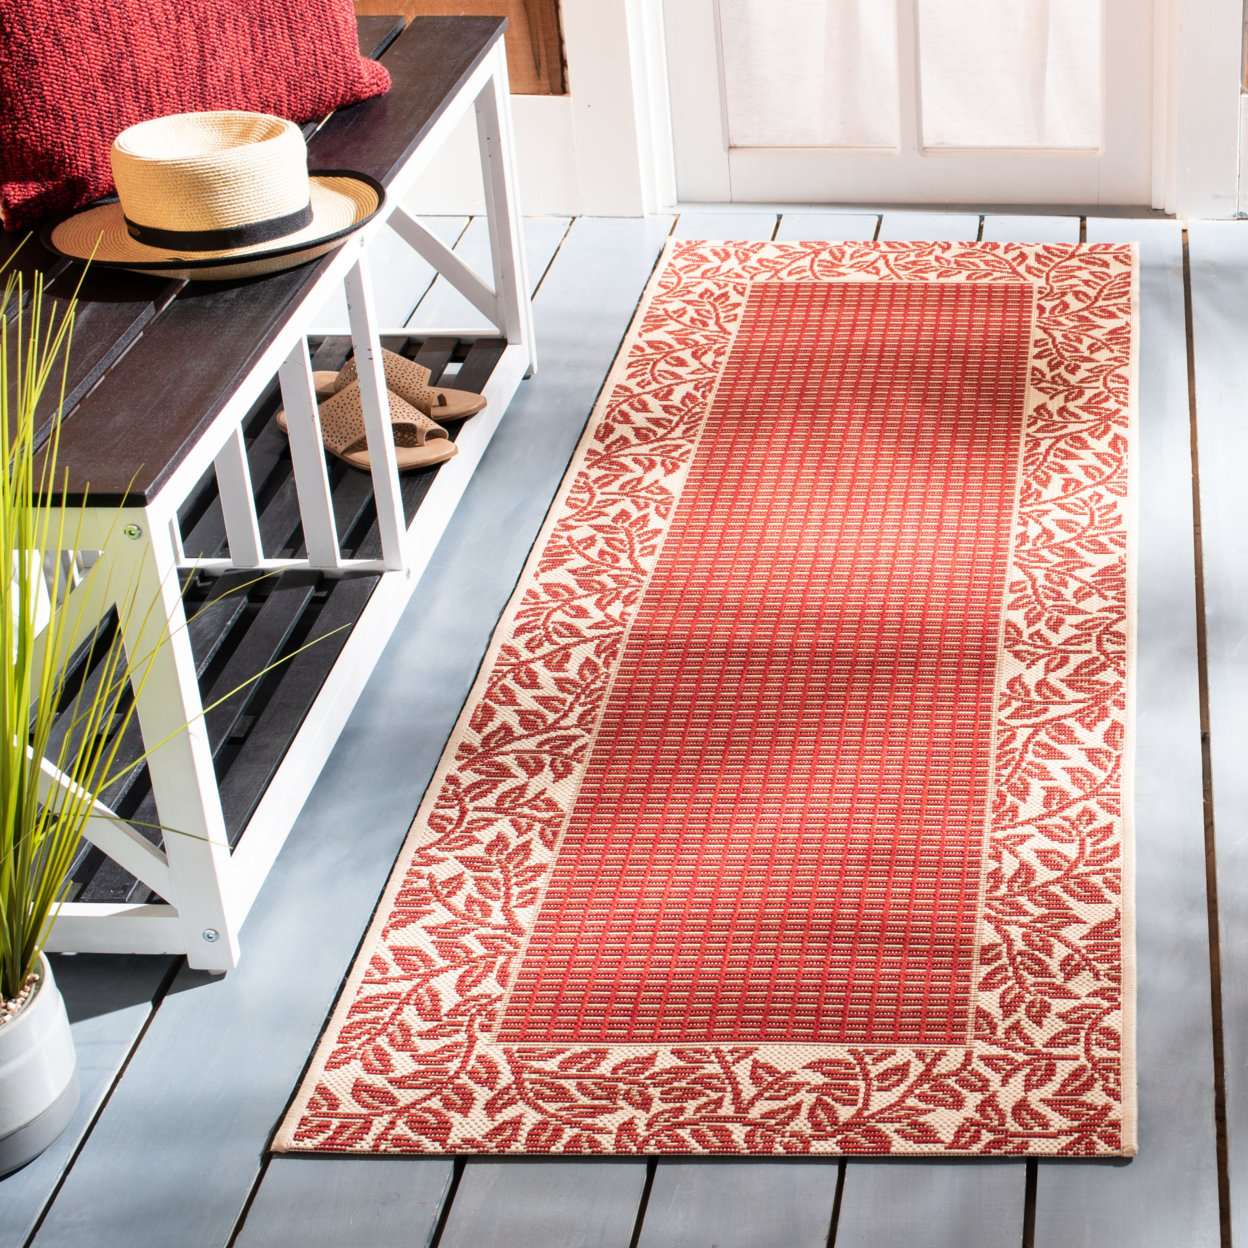 SAFAVIEH Courtyard CY0727-3707 Red / Natural Rug - 4' X 5' 7